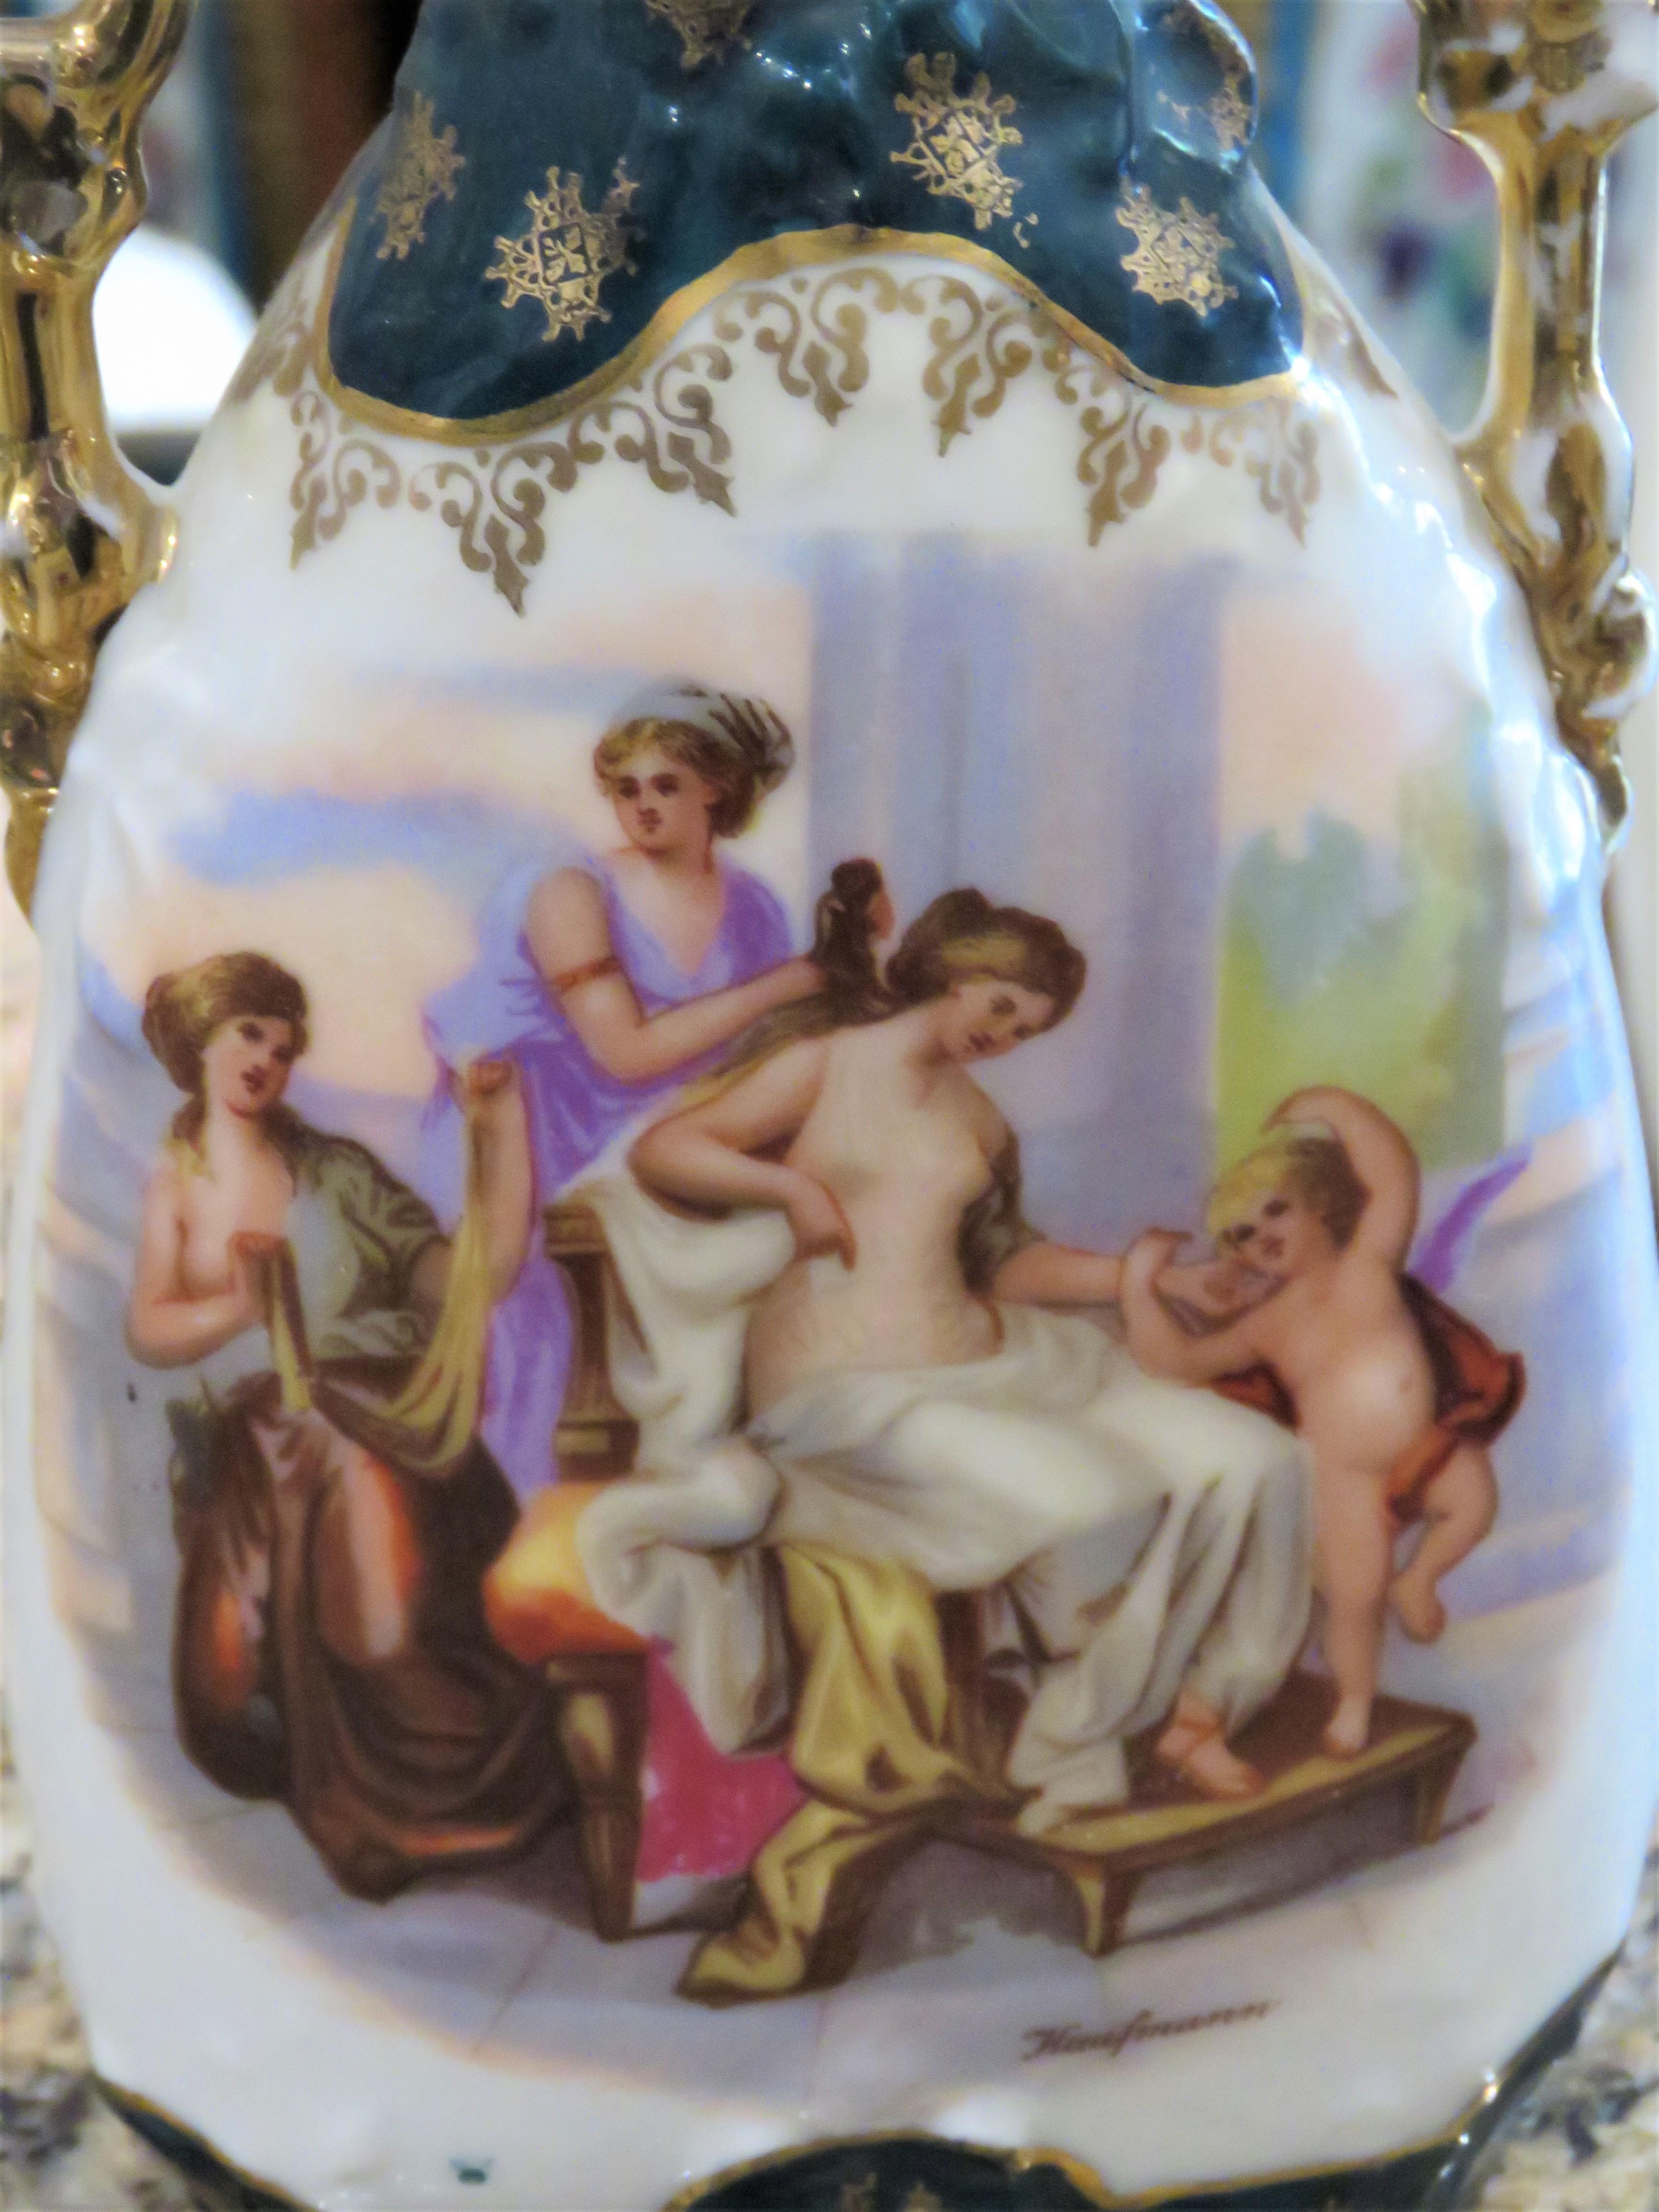  Exquisite 19th Century Austrian Royal Vienna Kaufmann Vase with Women Outdoors  In Fair Condition For Sale In New York, NY